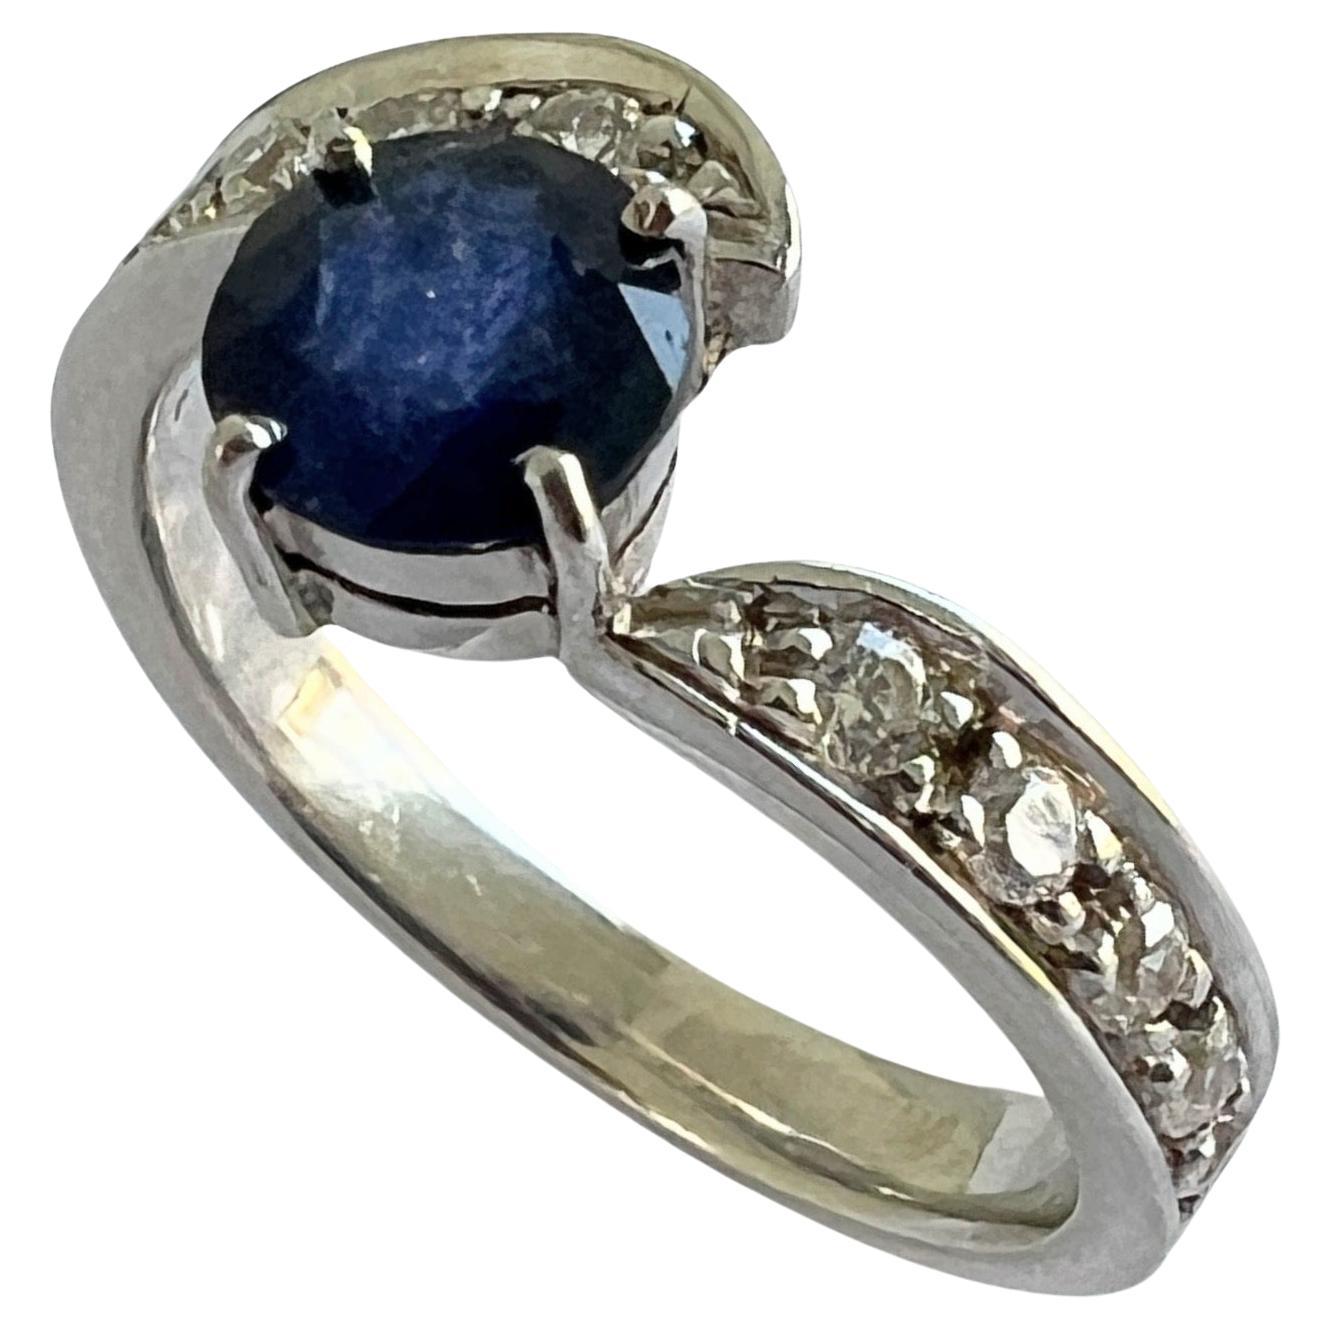 Elevate your love story with our enchanting 1ct Blue Sapphire Ring, surrounded by a shimmering halo of dazzling white sapphires on both sides. 

Key Features:
Adorned with a breathtaking 1ct blue sapphire, symbolizing loyalty, sincerity, and